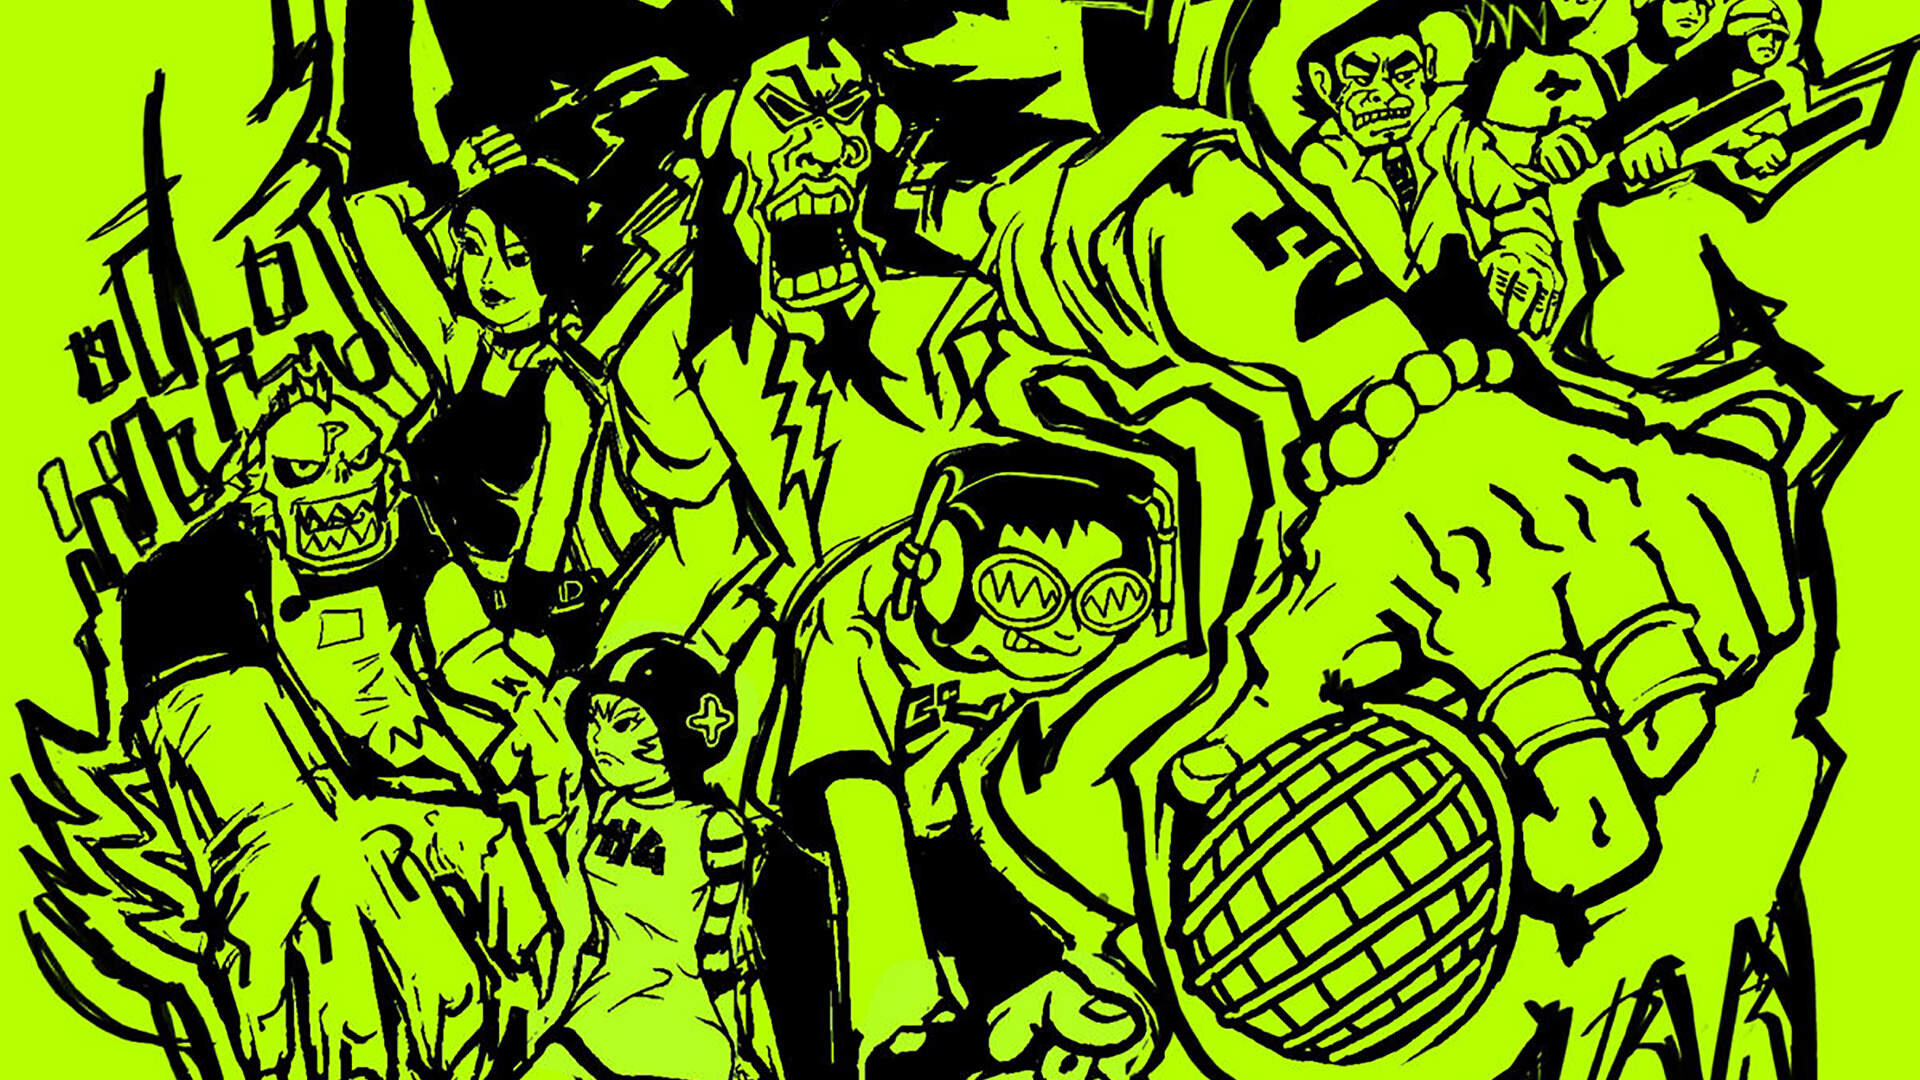 Jet set radio a time capsule of late s counter